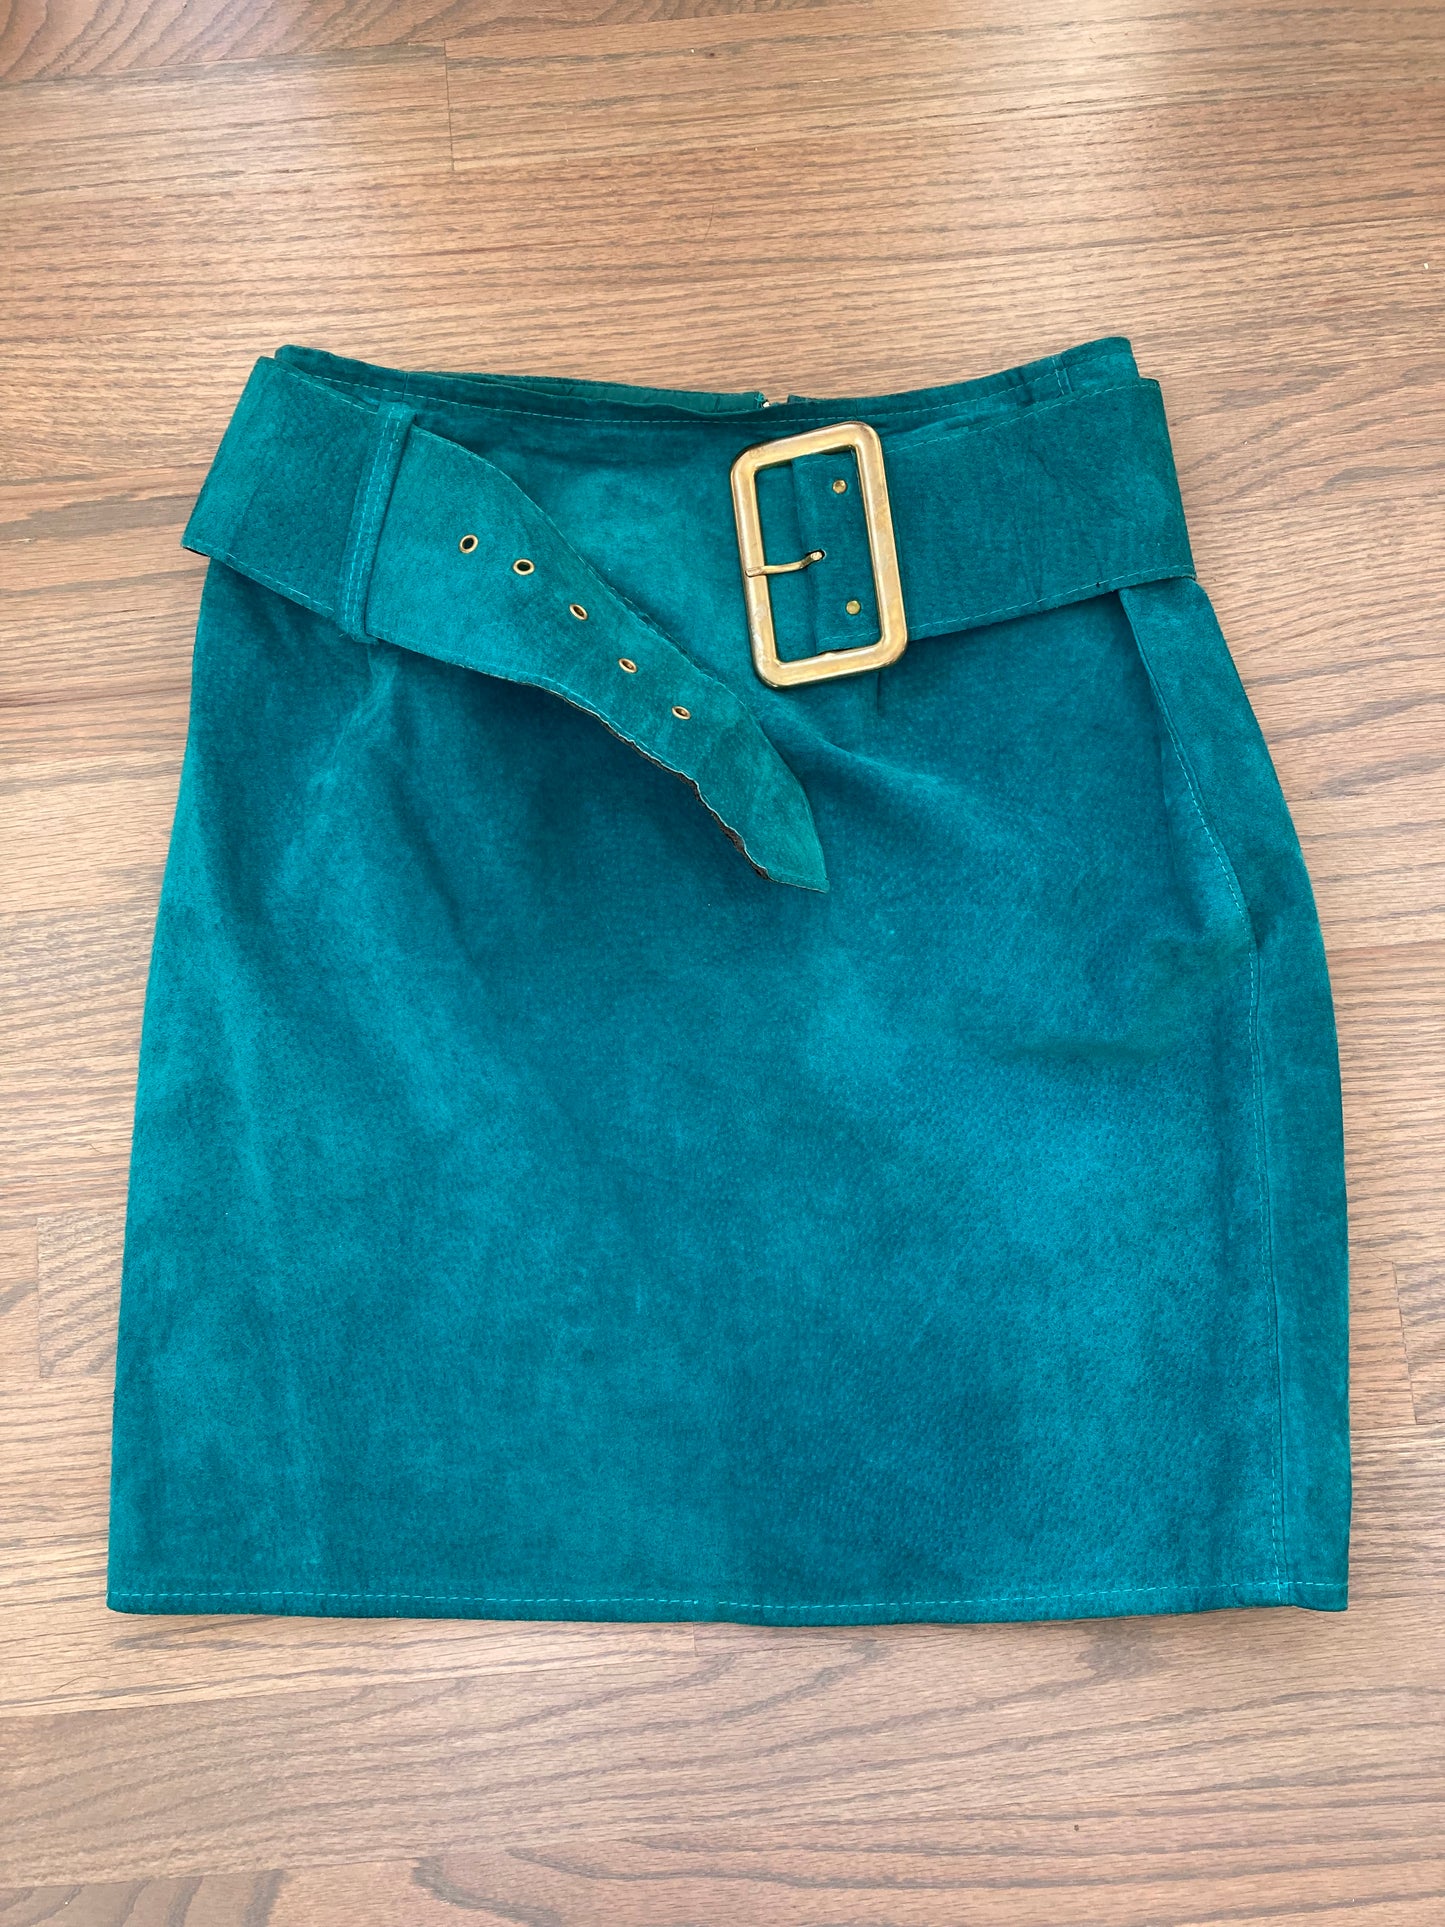 1980s Teal Suede Mini Skirt, Highwaisted Leather Skirt, Size S